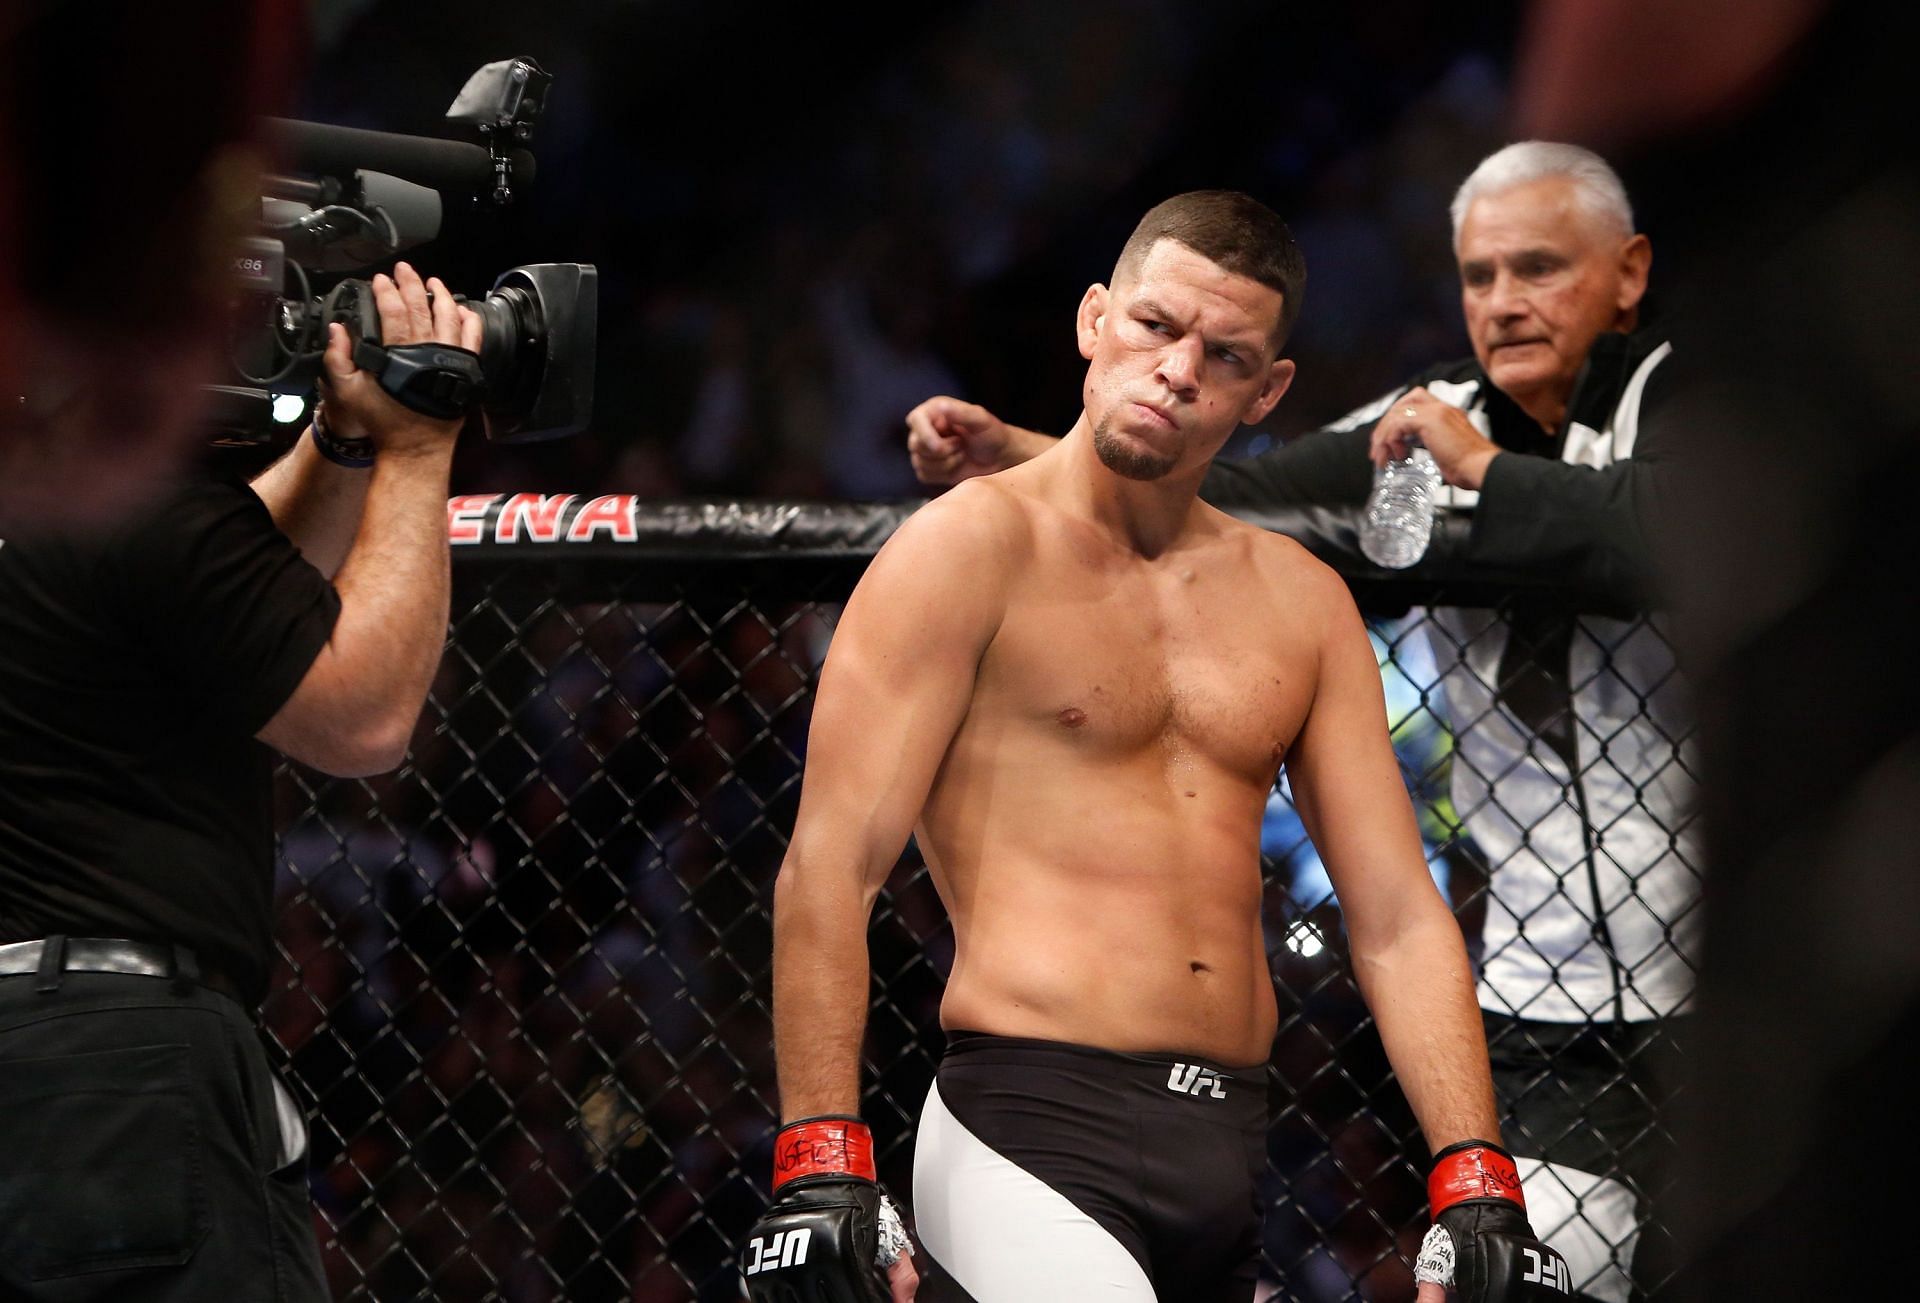 Nate Diaz thrilled fans with a classic triangle choke finish in 2008